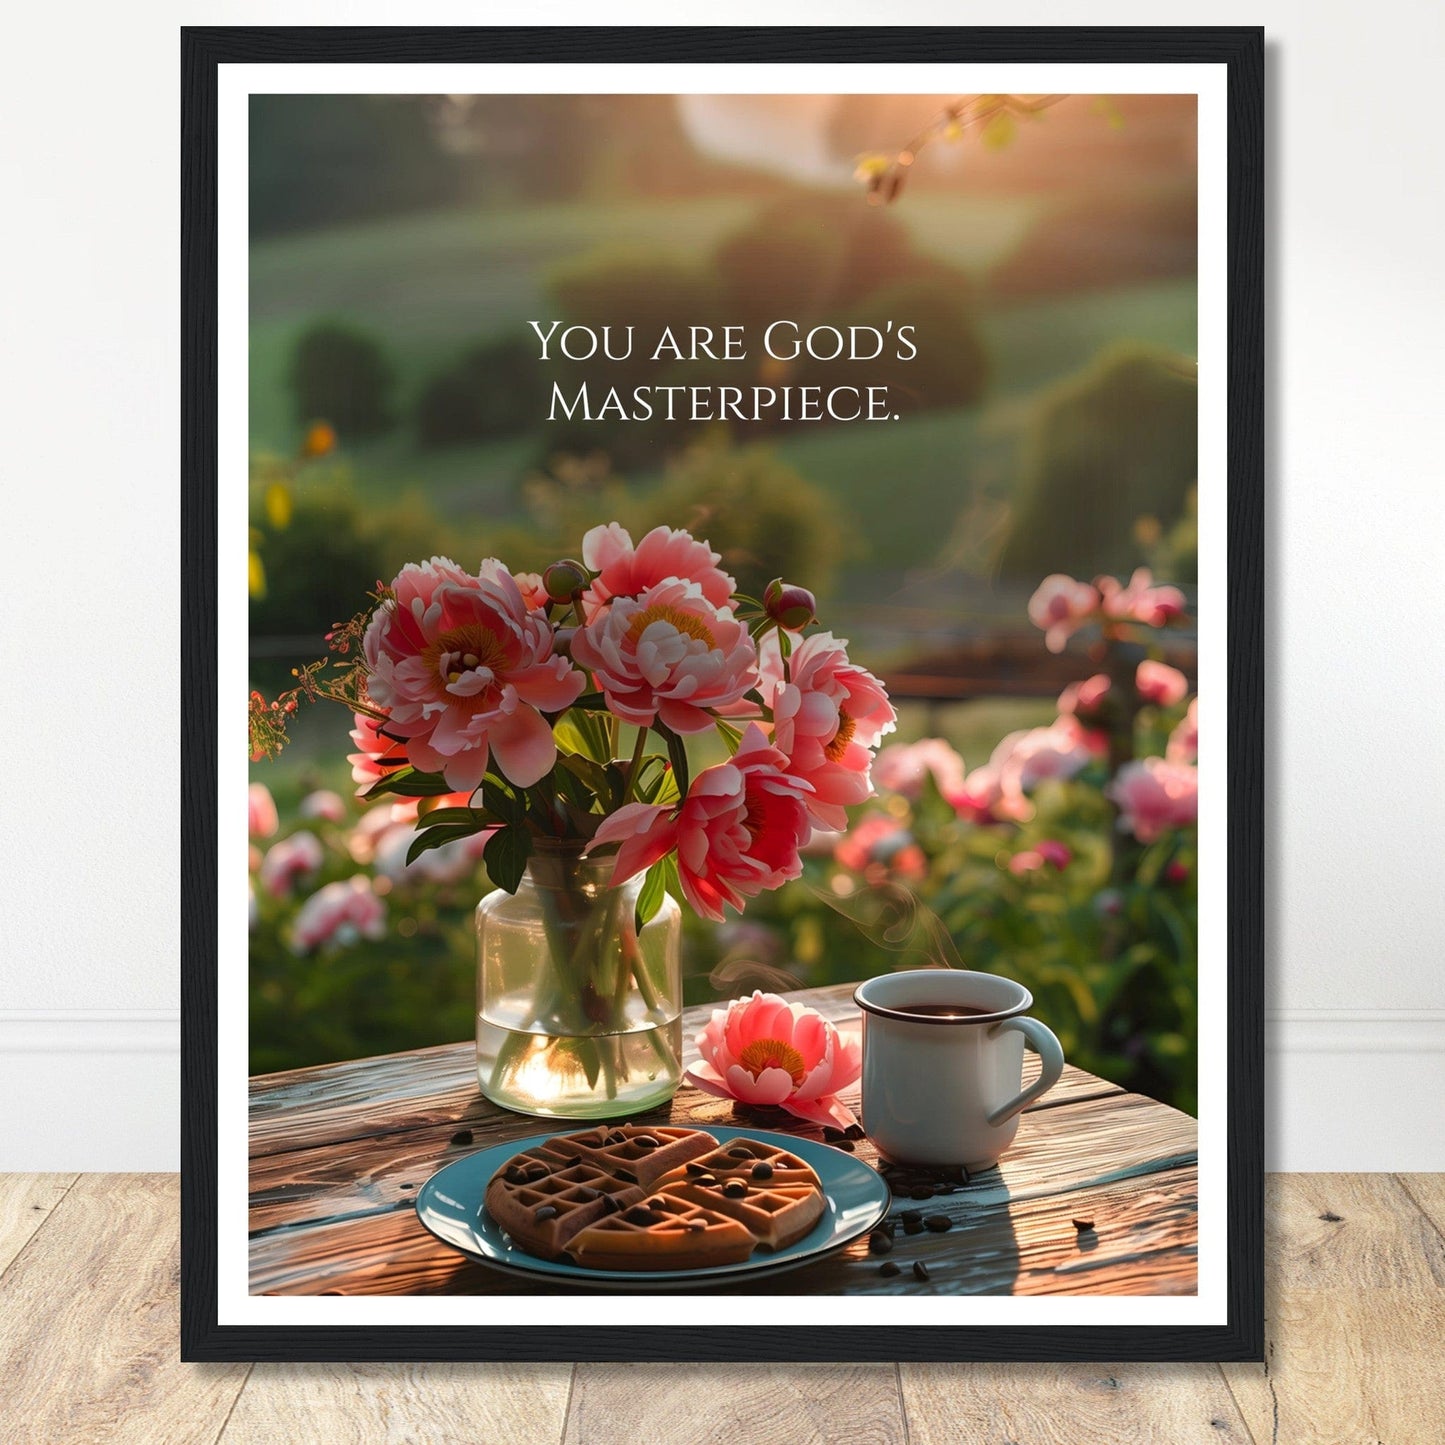 Coffee With My Father Print Material 40x50 cm / 16x20″ / Premium Matte Paper Wooden Framed Poster / Black frame You Are God's Masterpiece - Custom Art